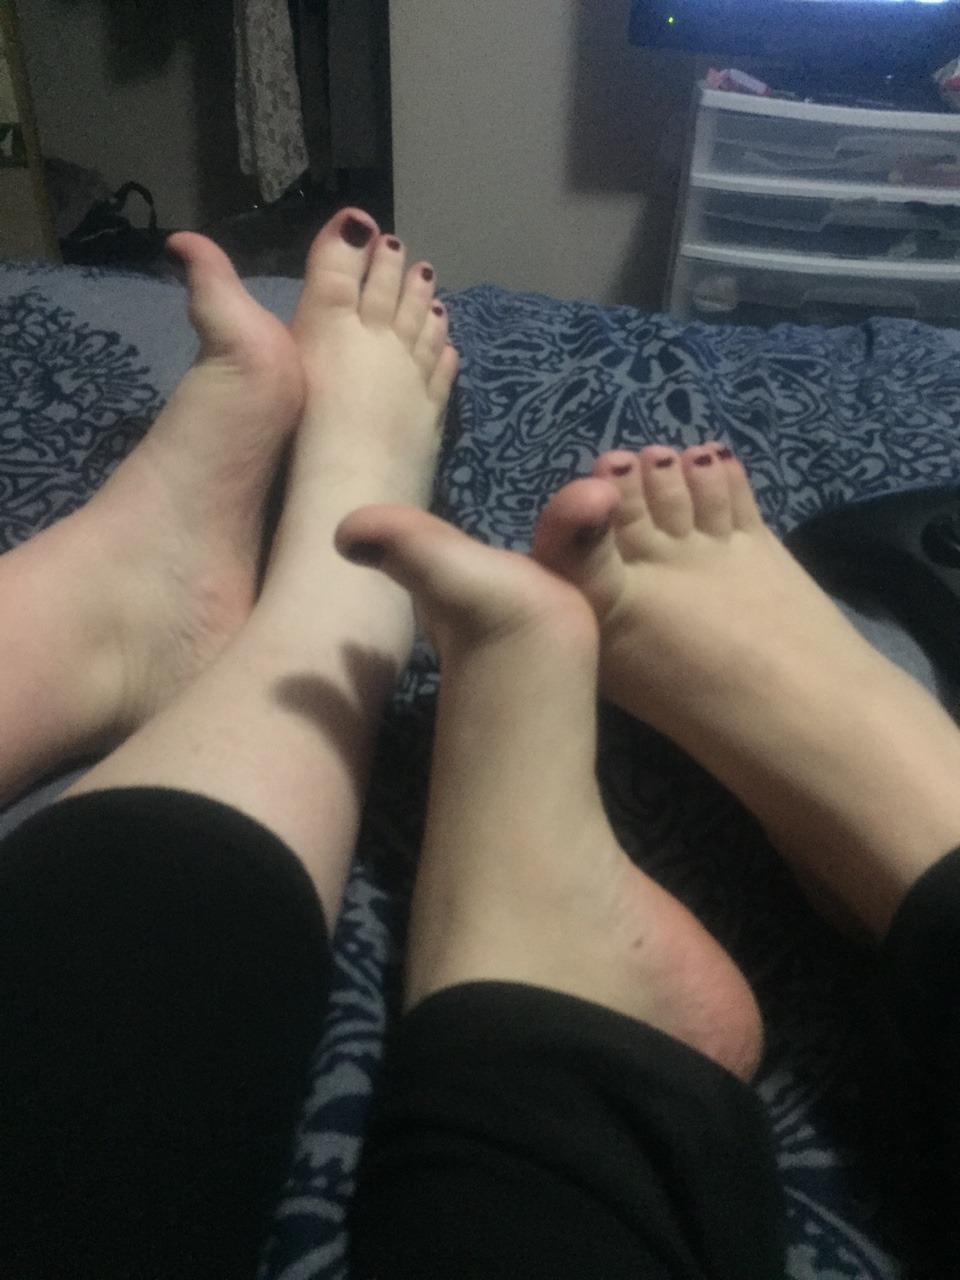 sierra-marie94:  My sister and I got matching pedicures ;)  Can I massage your WONDERFUL